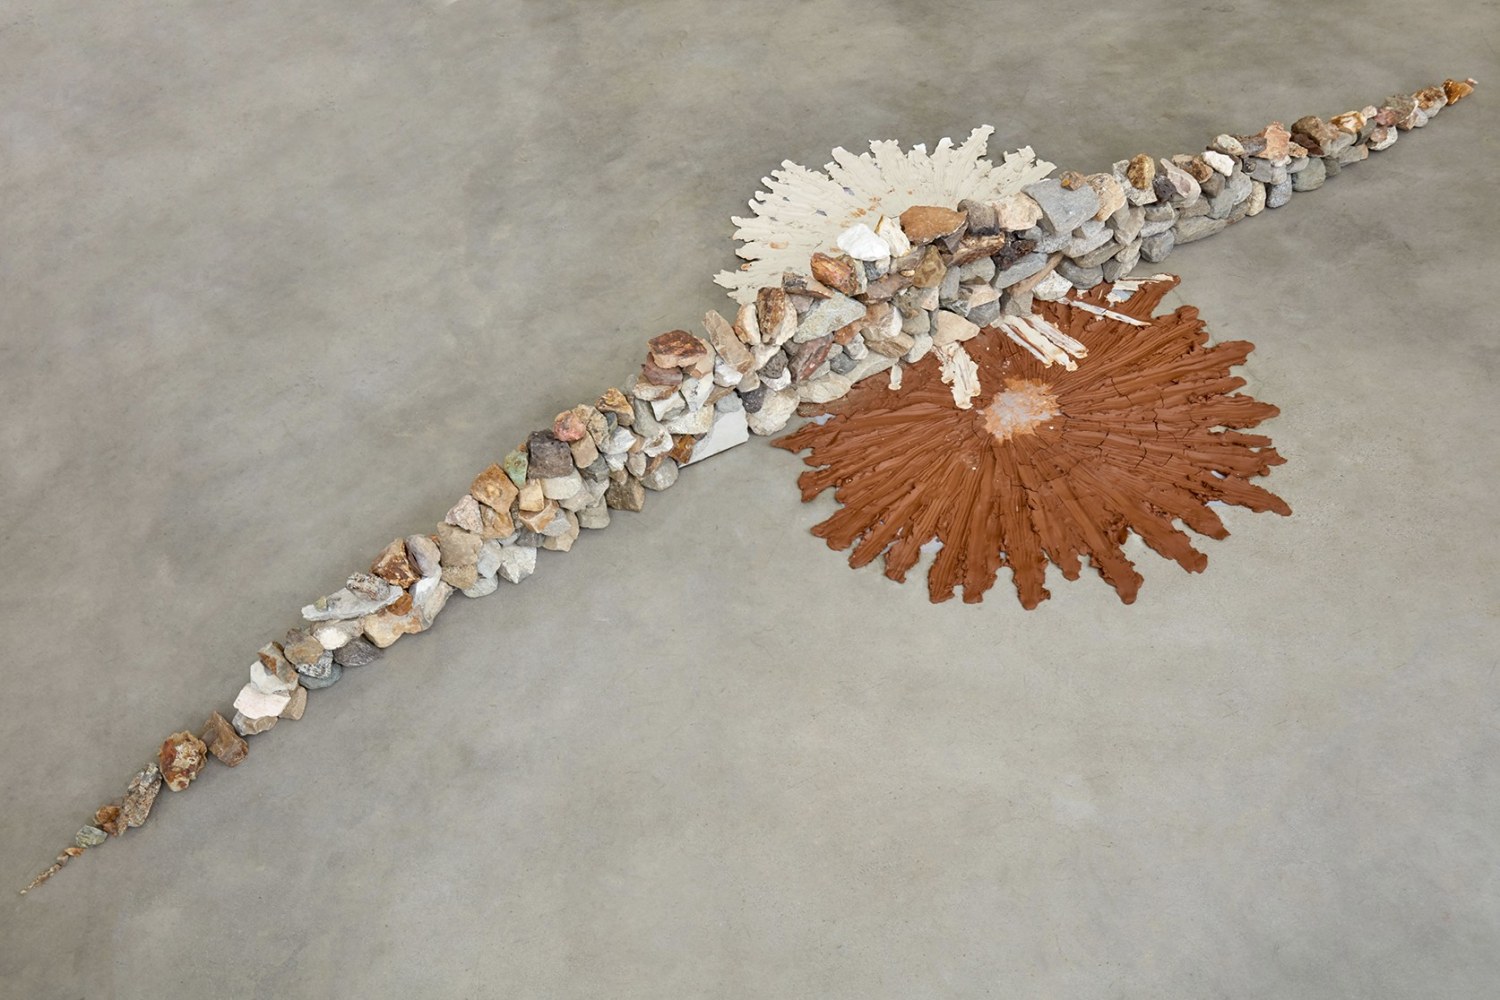 Brie Ruais
The things we build, the things we let fall apart, the things we destroy, 2020
unfired stoneware, rocks
Dimensions variable
BR042